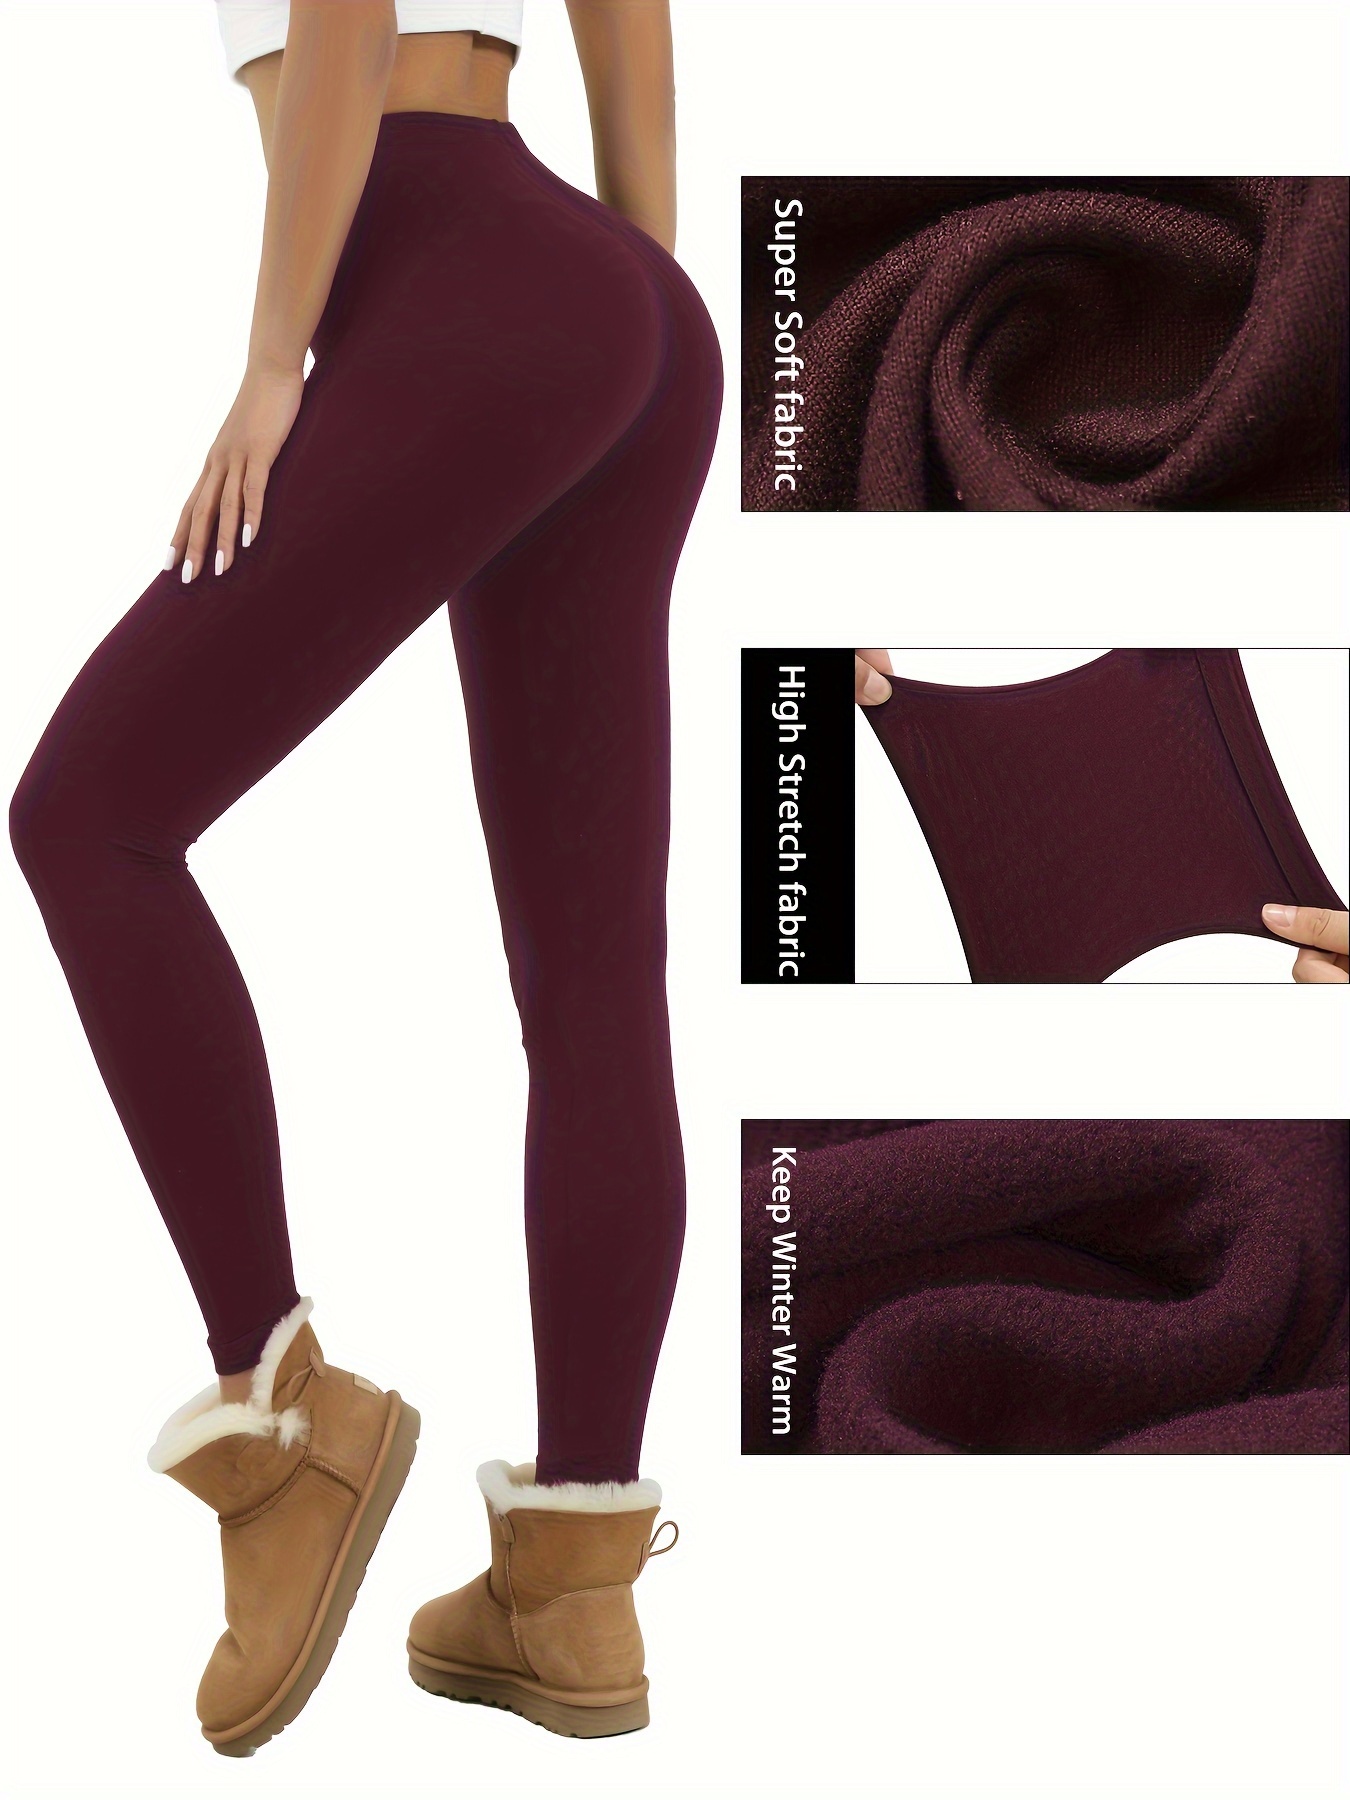 YDOJG Soft Leggings For Women Tummy Control Fashion Women Brushed Stretch  Lined Thick Tights Warm Winter Pants Warm Leggings Ankle-Length Pants L 